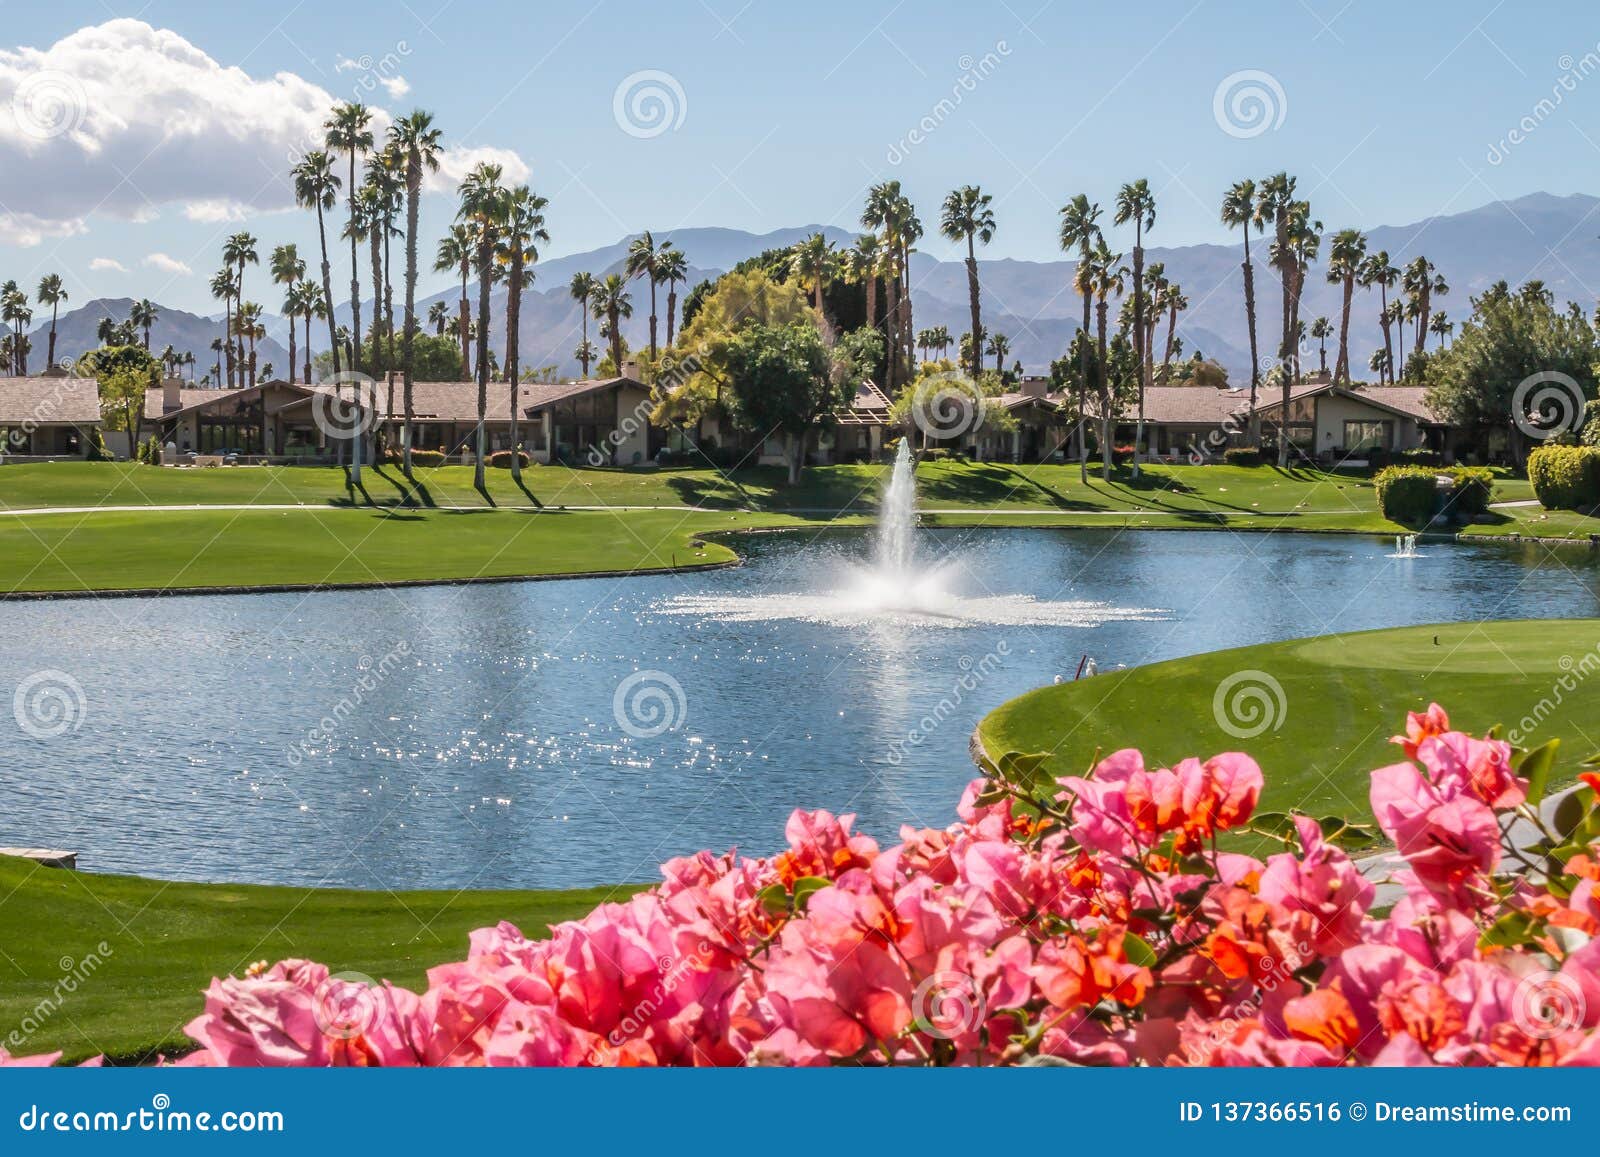 Relaxing Country Club View in Palm Springs, California Stock Photo